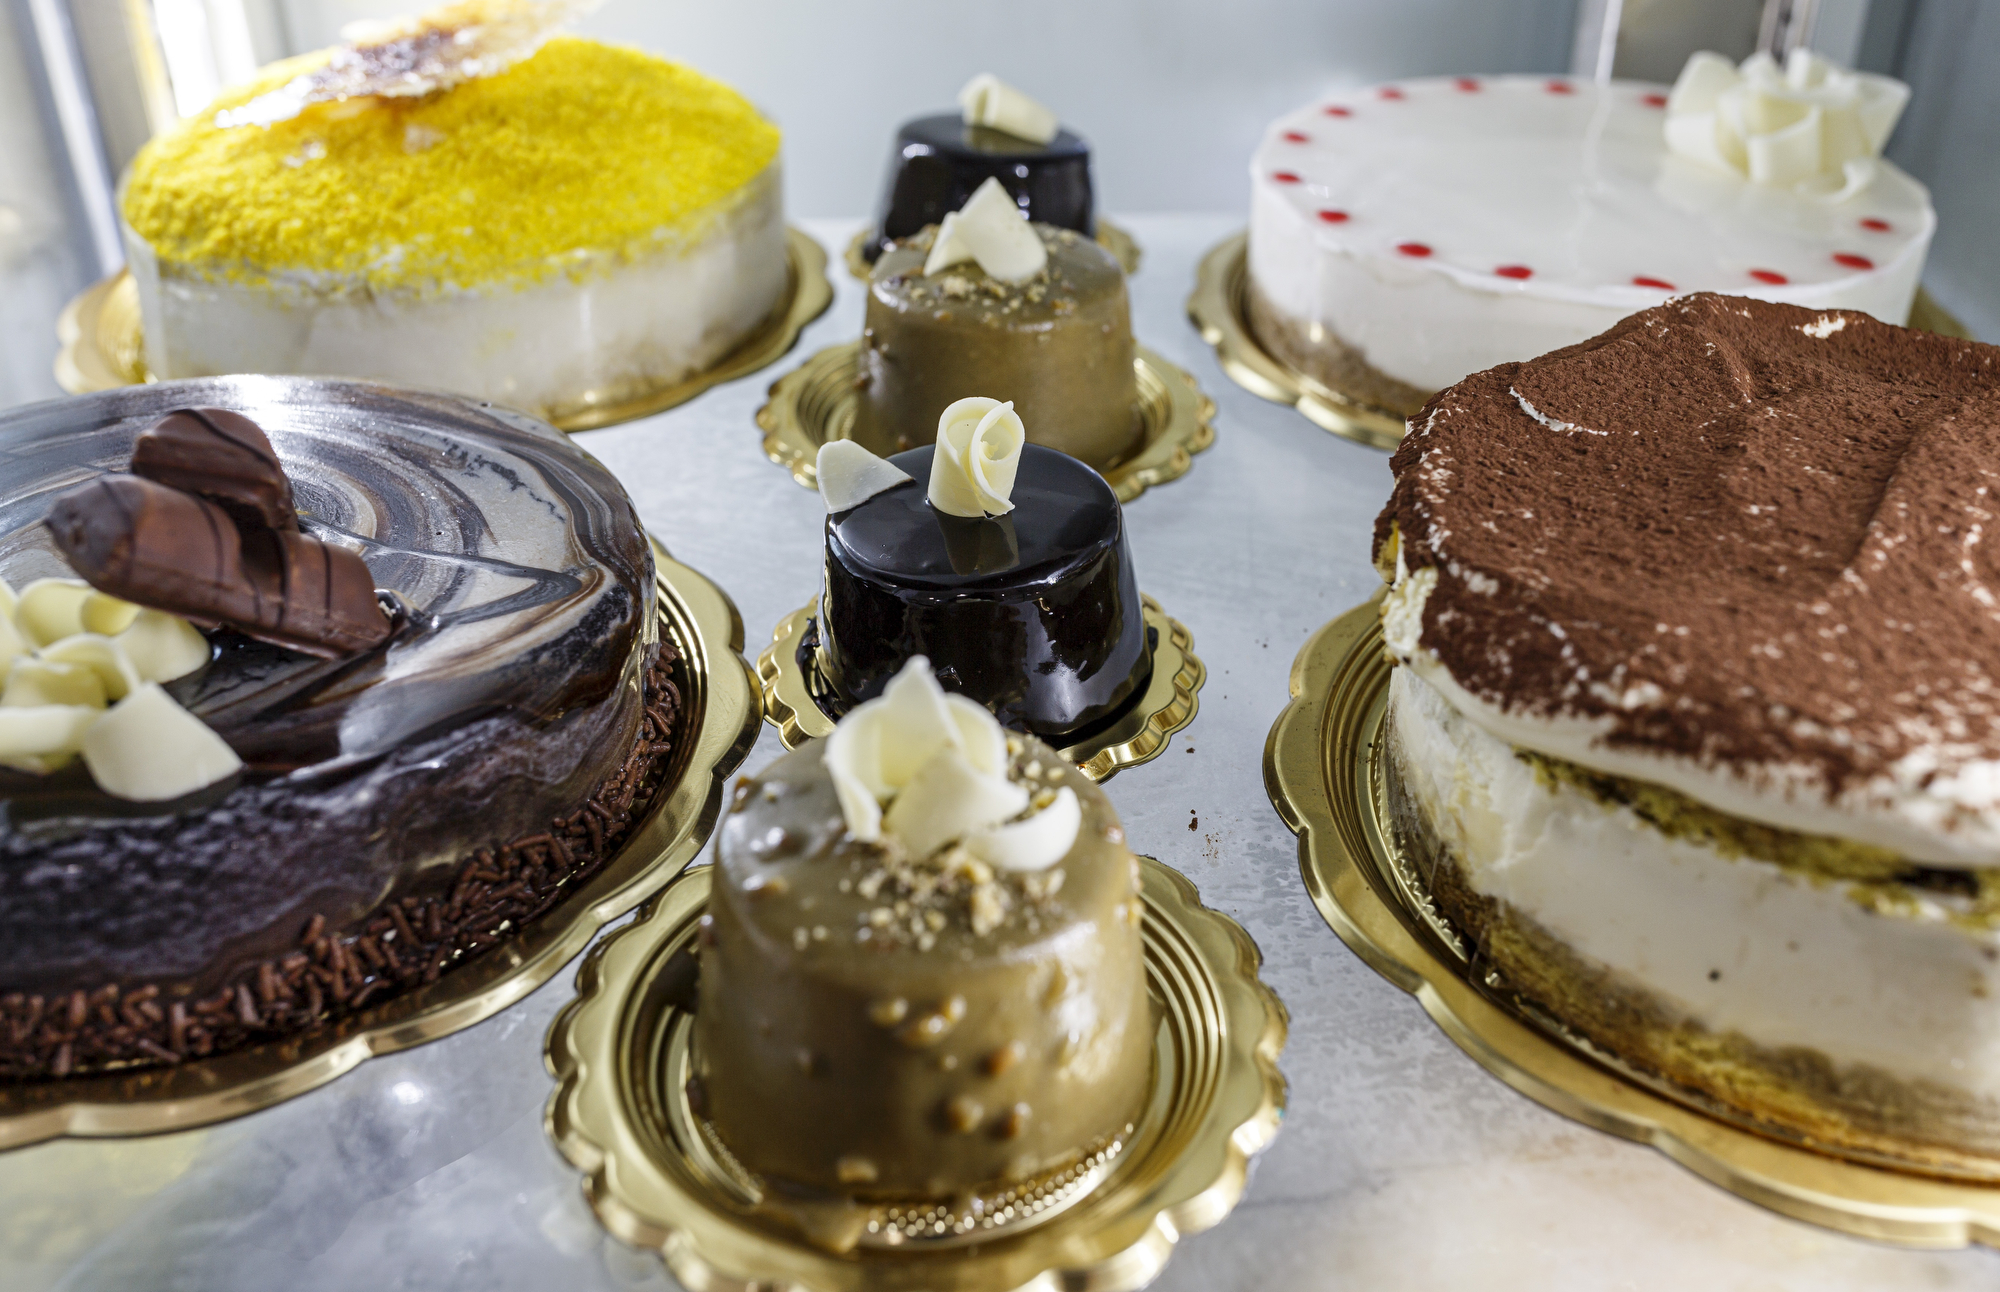 La Bella Sicilia Bakery and Gelateria is located at 5510 Carlisle Pike in Hampden Township. The bakery serves dozens of authentic Italian desserts and pastries, as well as pizza and Italian foods, such as arancini.September 25, 2020.Dan Gleiter | dgleiter@pennlive.com